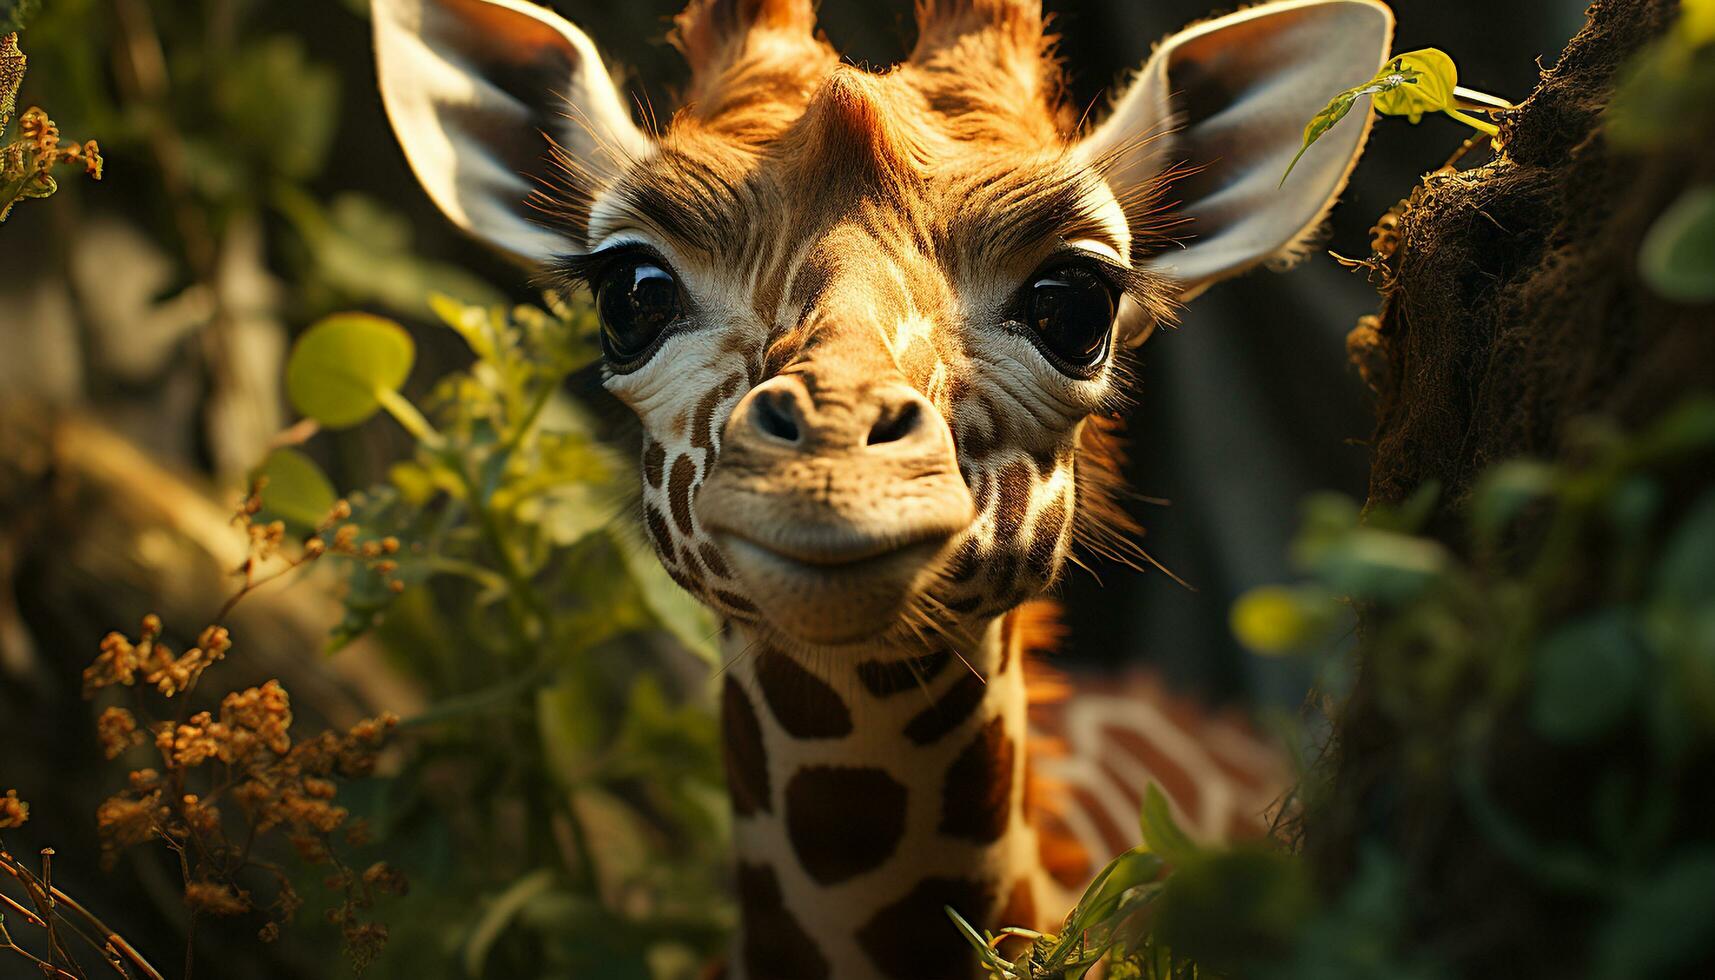 Cute giraffe looking at camera in African wilderness generated by AI photo